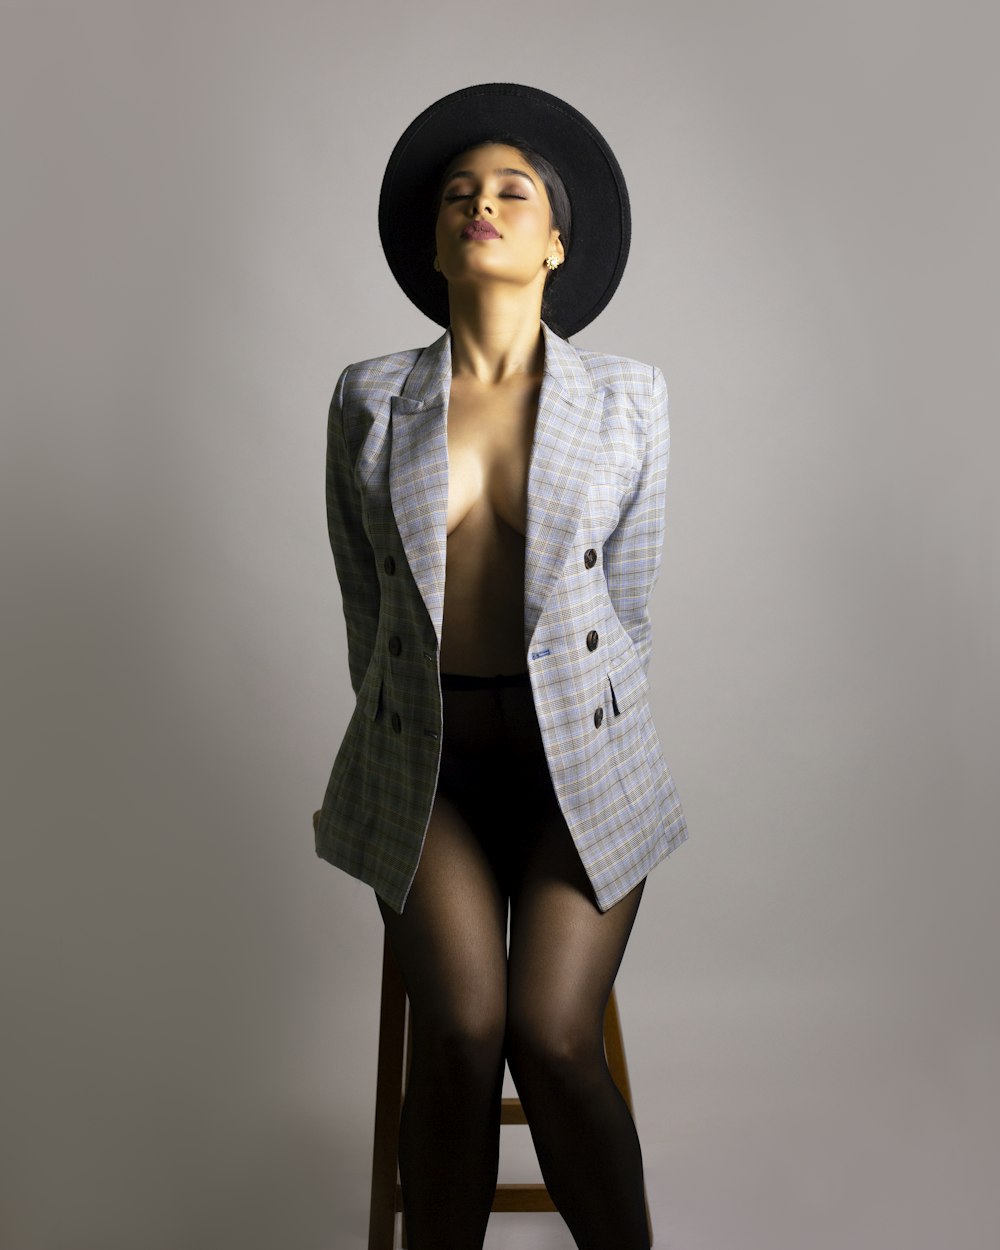 woman in black hat and gray blazer